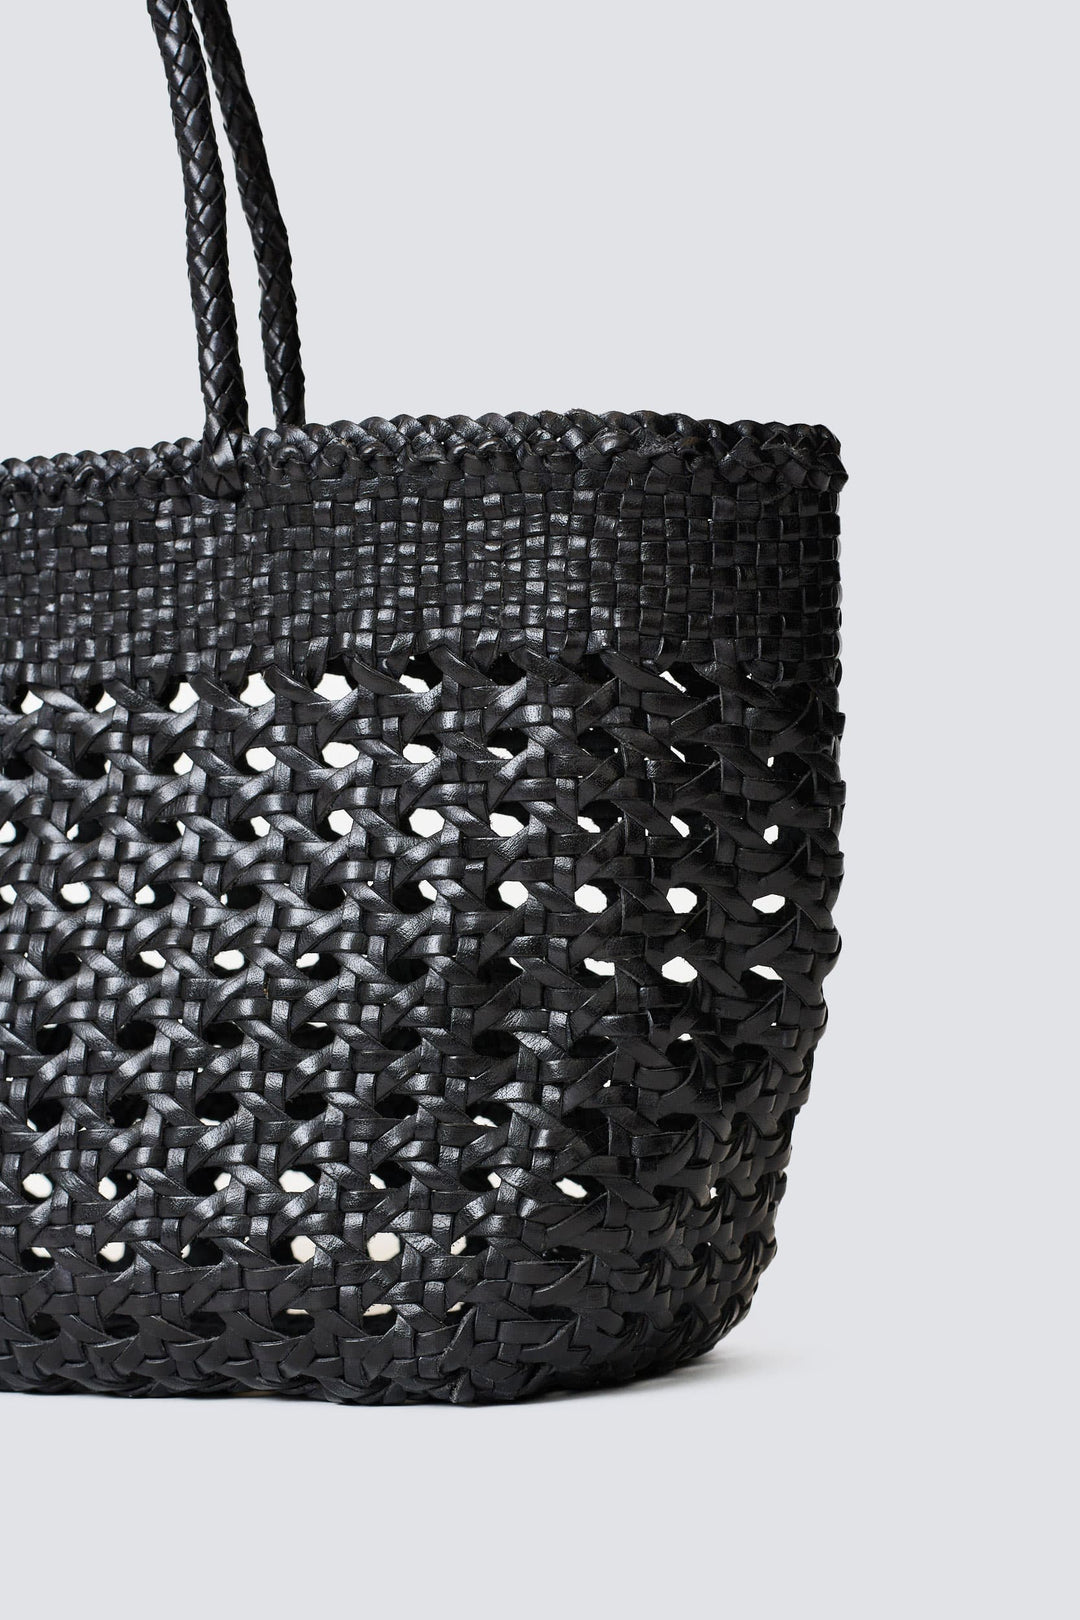 Dragon Diffusion woven leather bag handmade - Cannage Kanpur Black